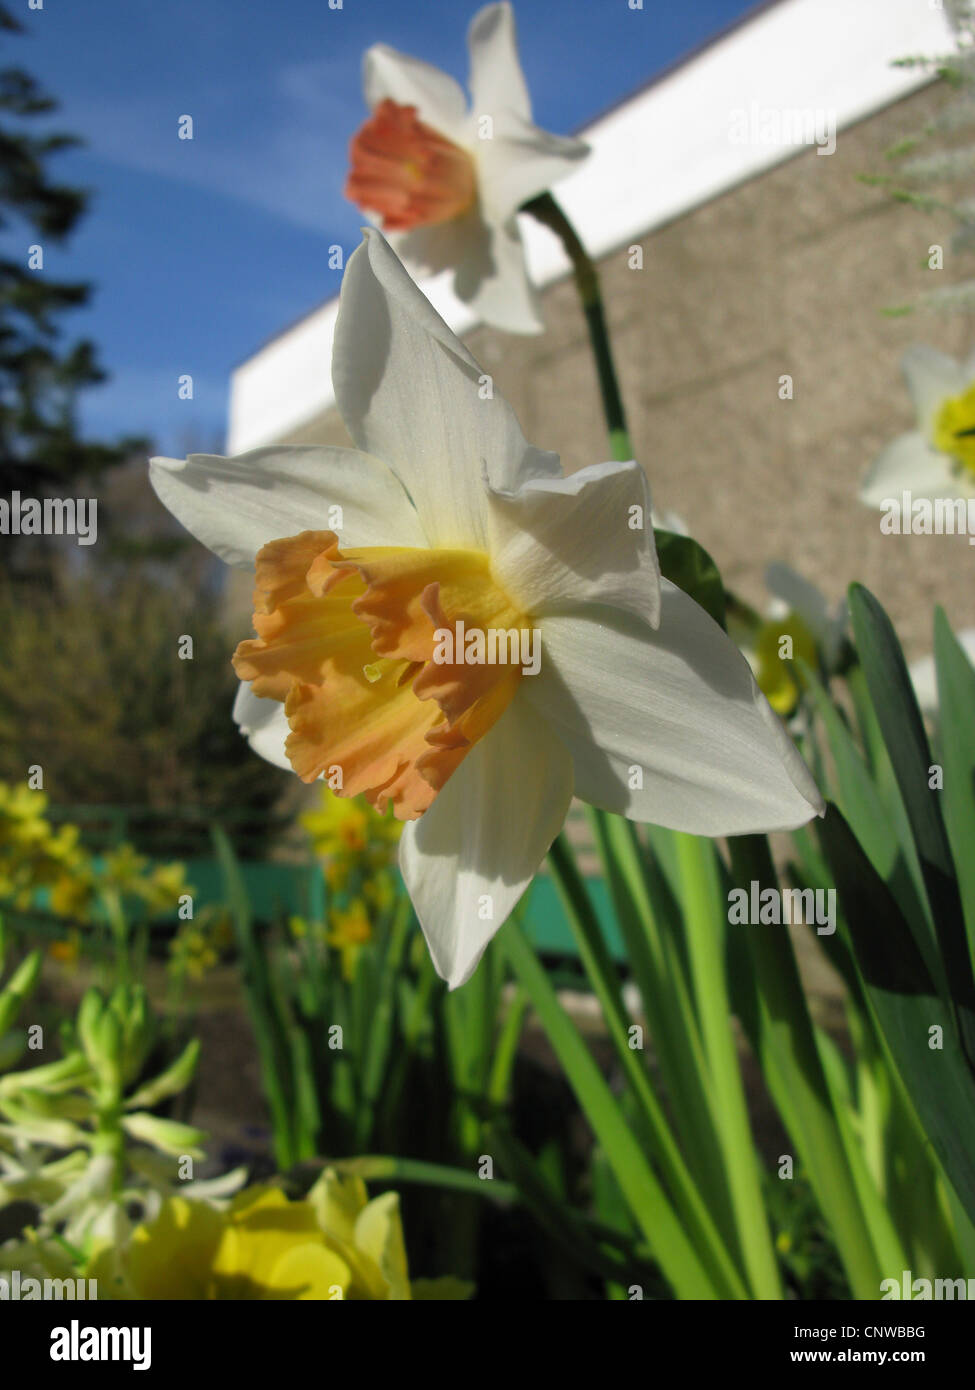 daffodil (Narcissus Accent, Narcissus 'Accent'), large-cup Daffodil, cultivar Accent Stock Photo